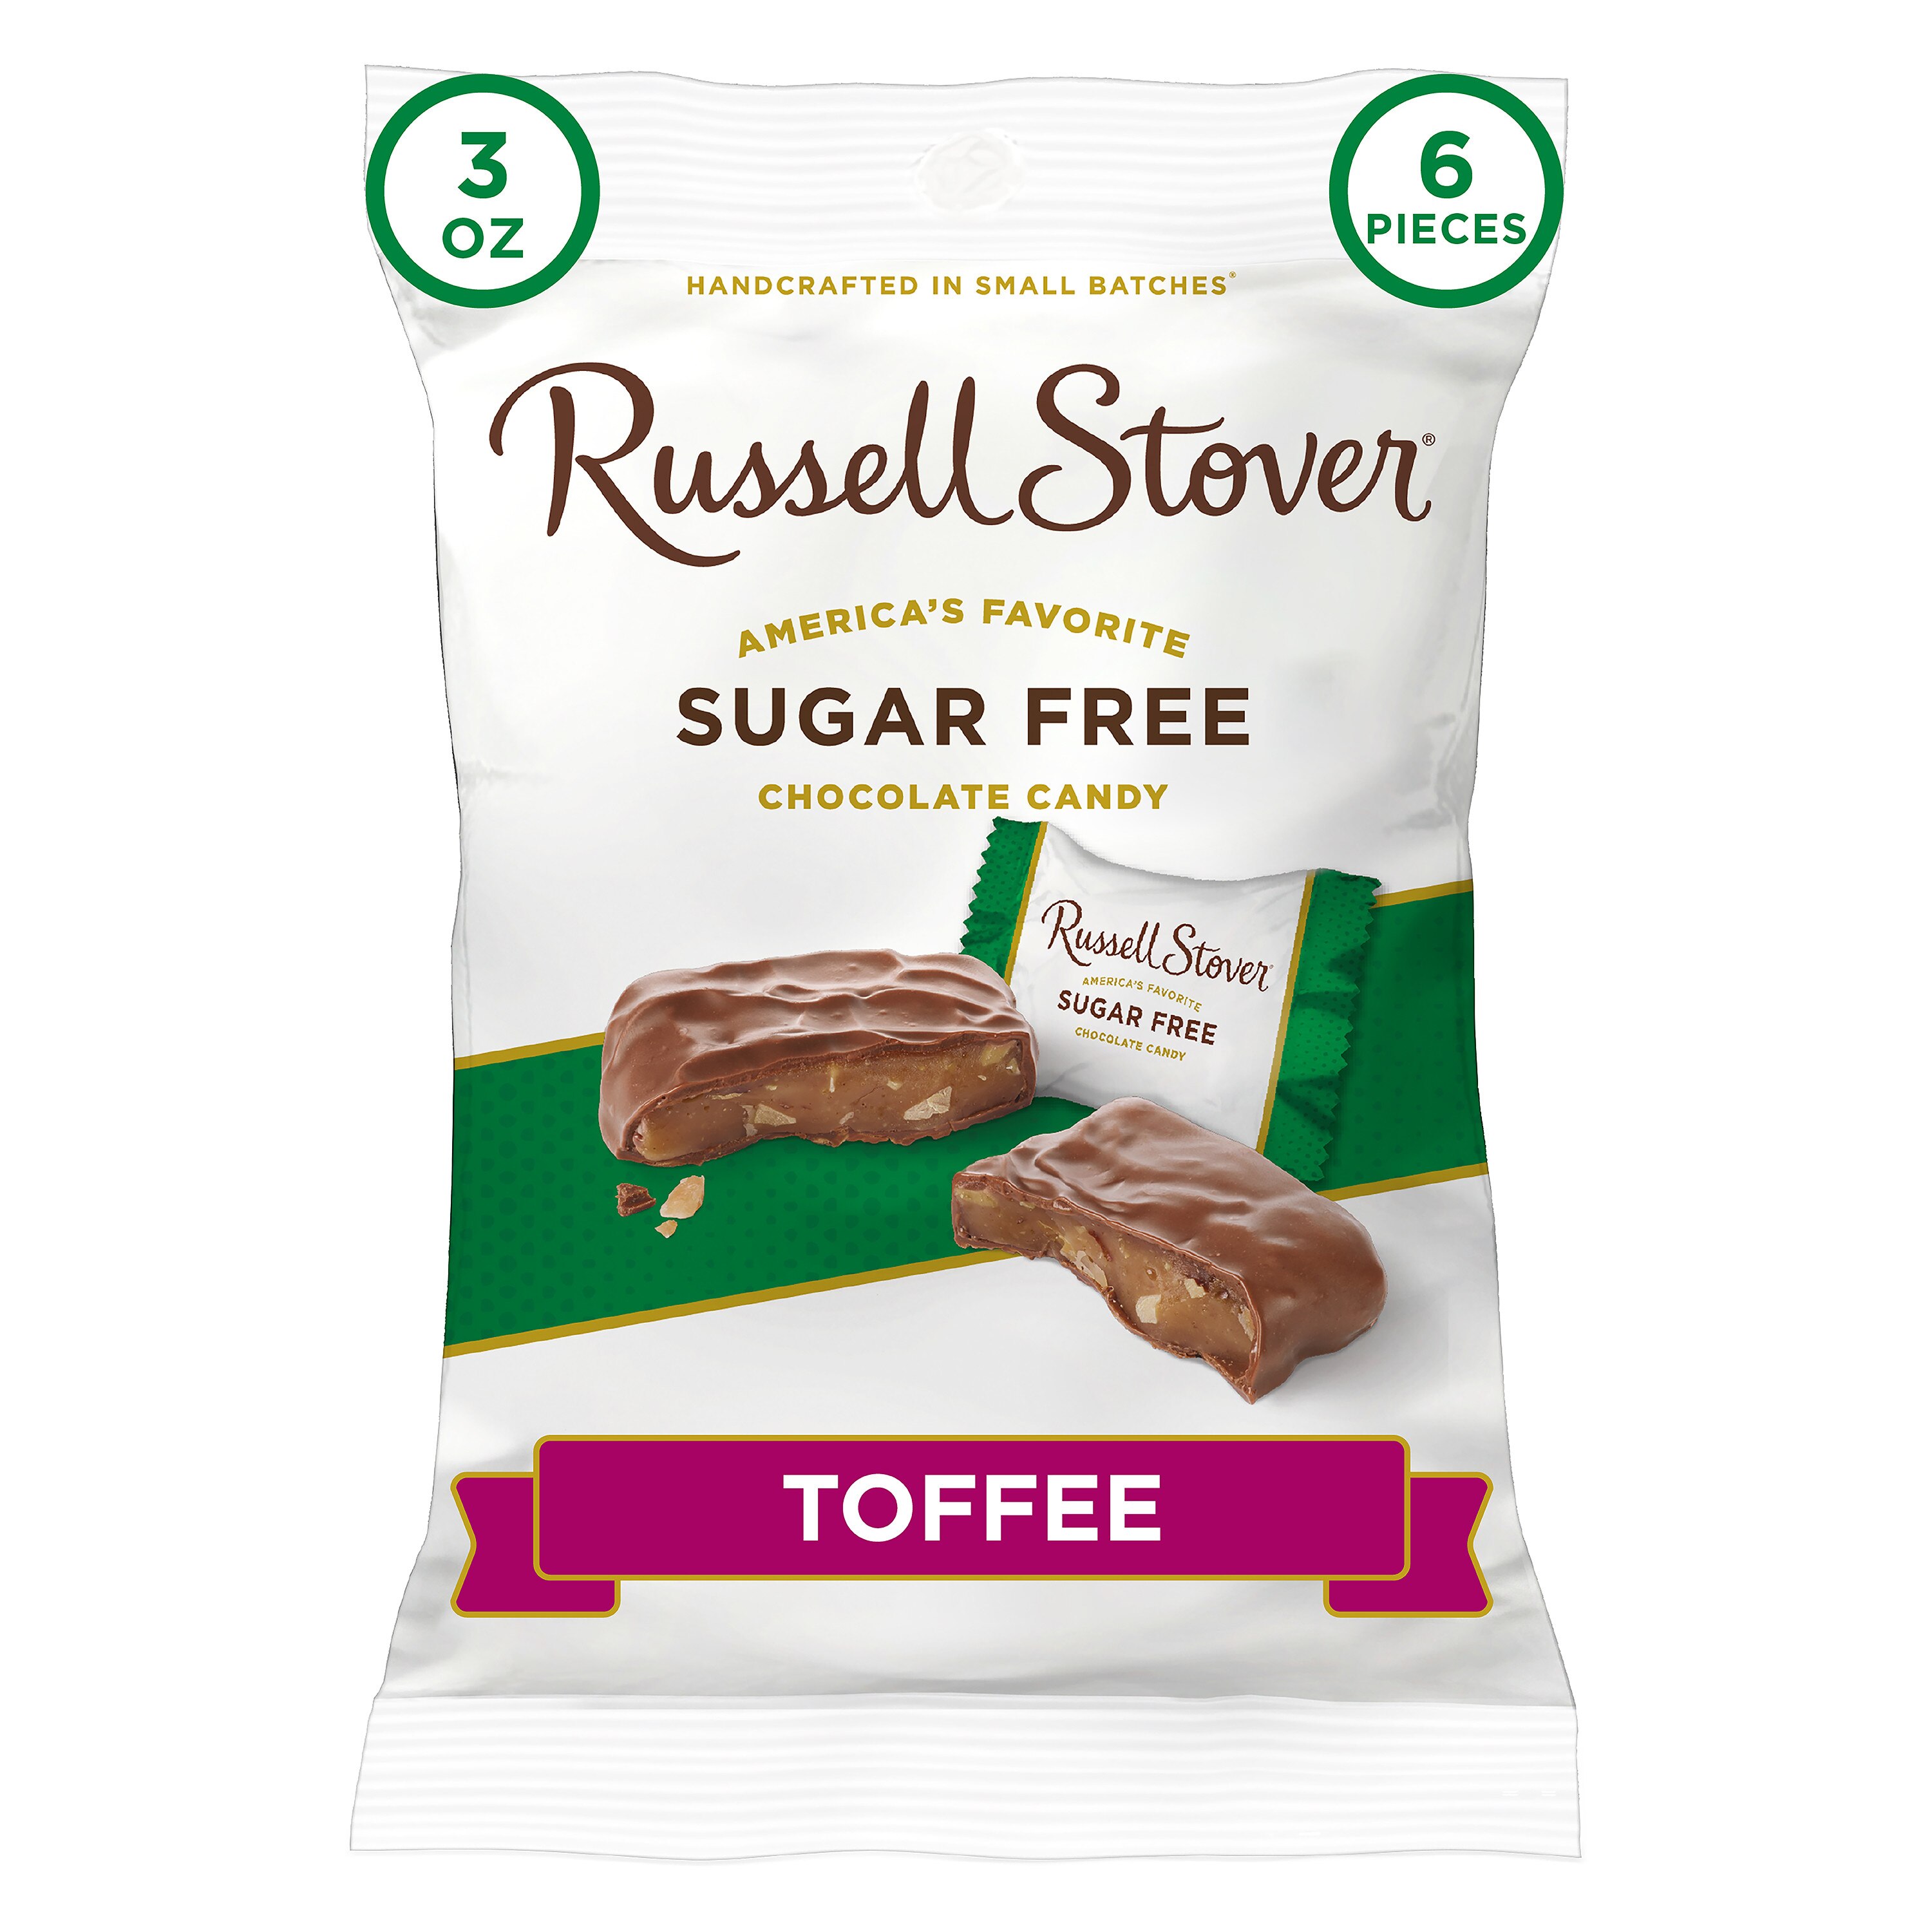 Russell Stover Sugar Free Toffee Chocolate Candy, 3 oz